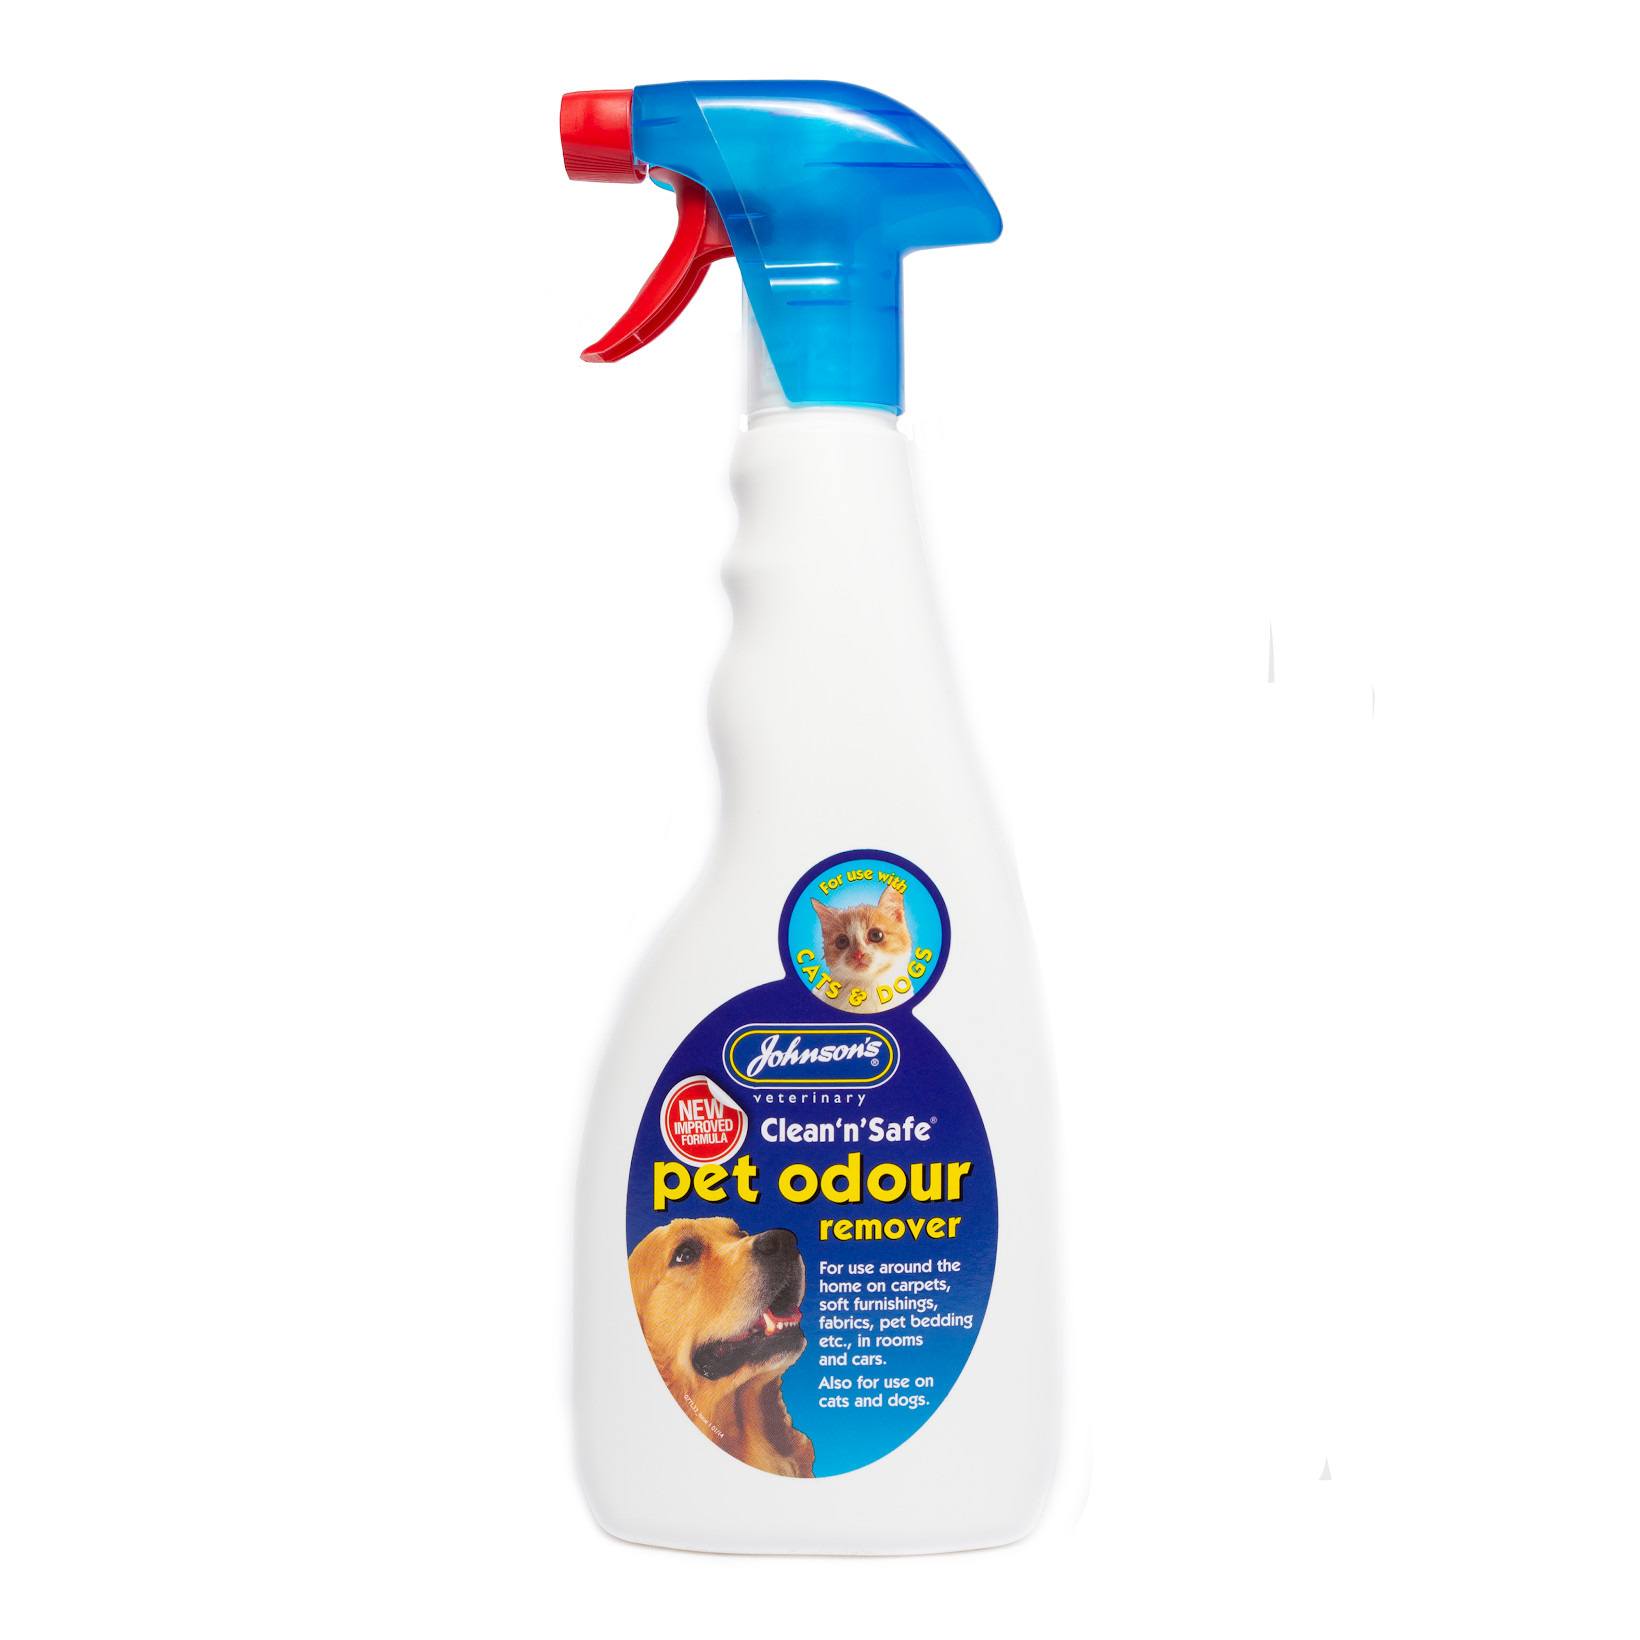 Johnson's Clean 'N' Safe Pet Odour Remover Cleaning Disinfectant 500ml